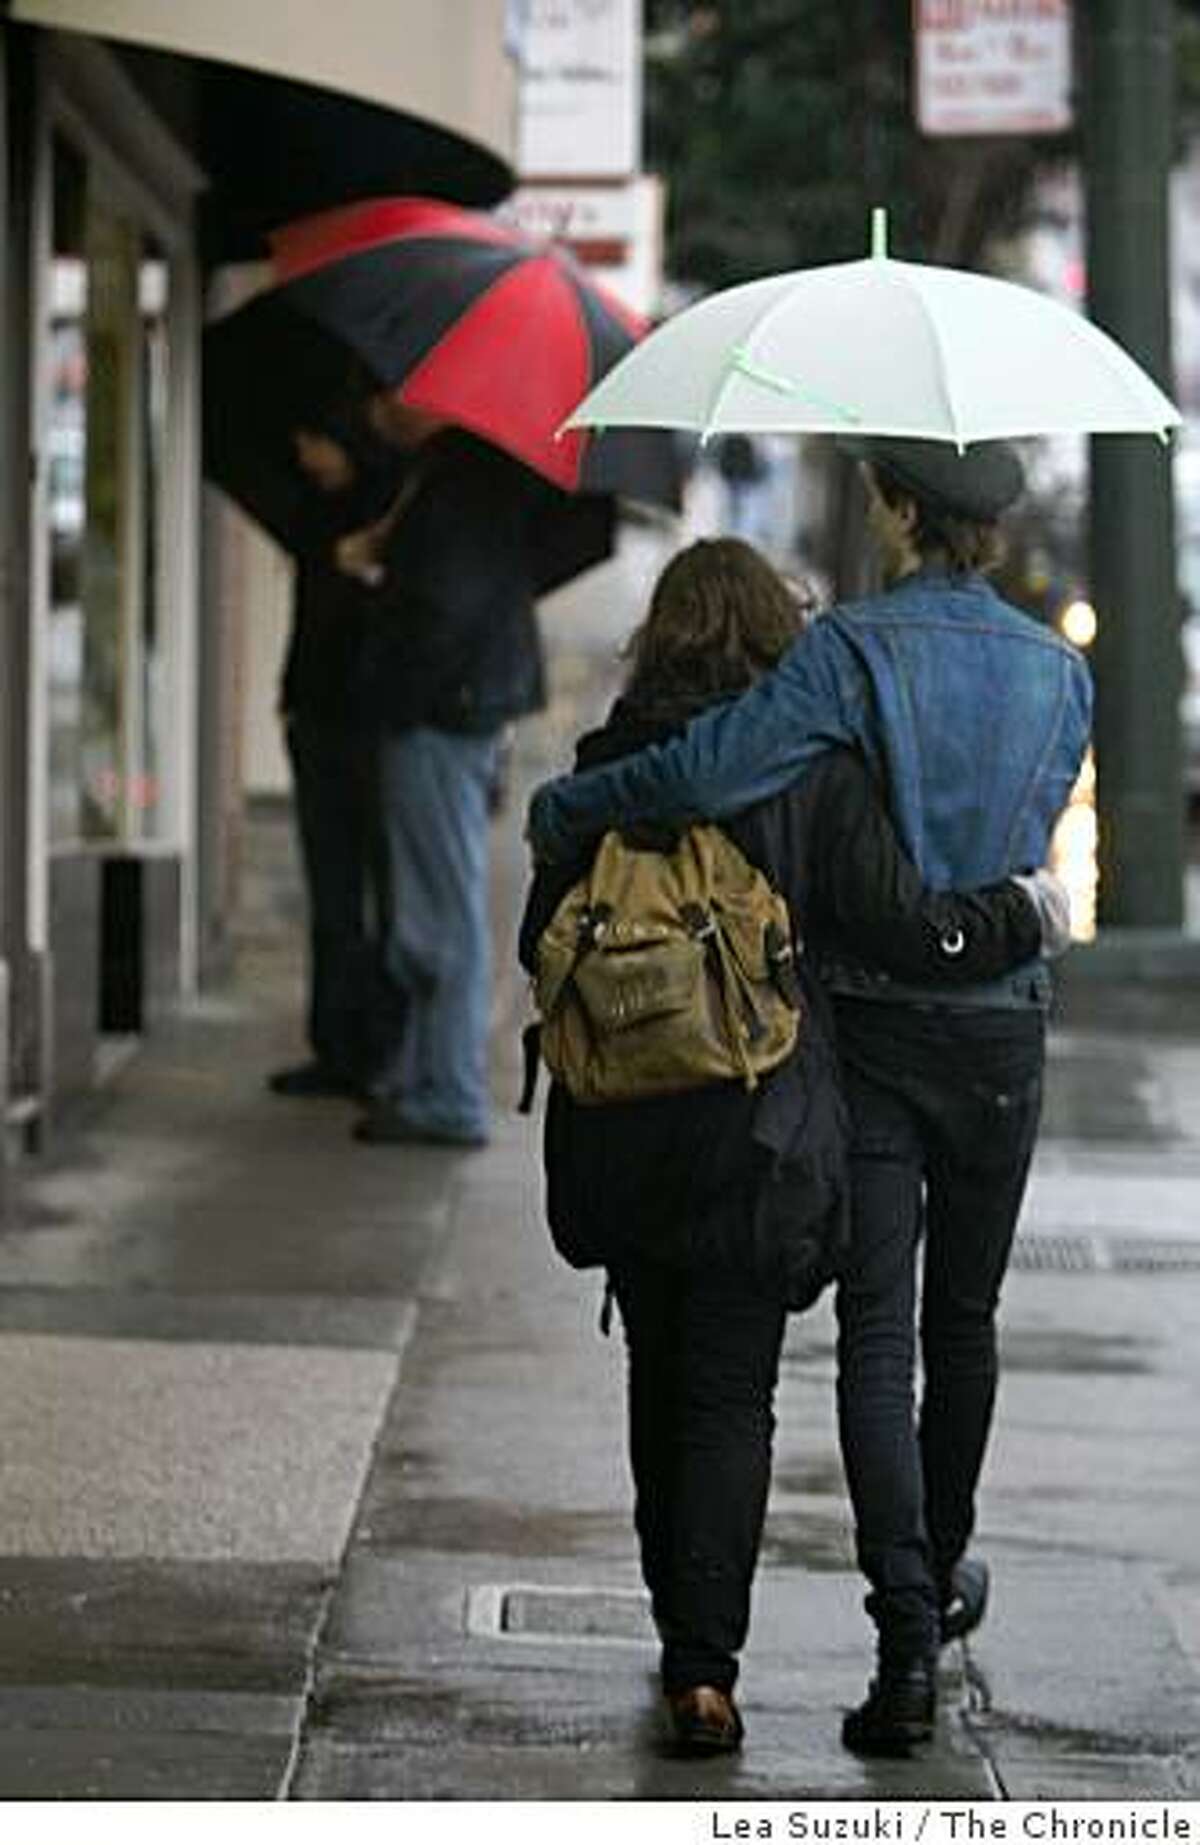 Victoria Sim ( to r) and Lynn Tolliver of Montreal, Canada share an umbrella as they walk in the rain on Castro Street in San Francisco, Calif. on Sunday, February 22, 2009.